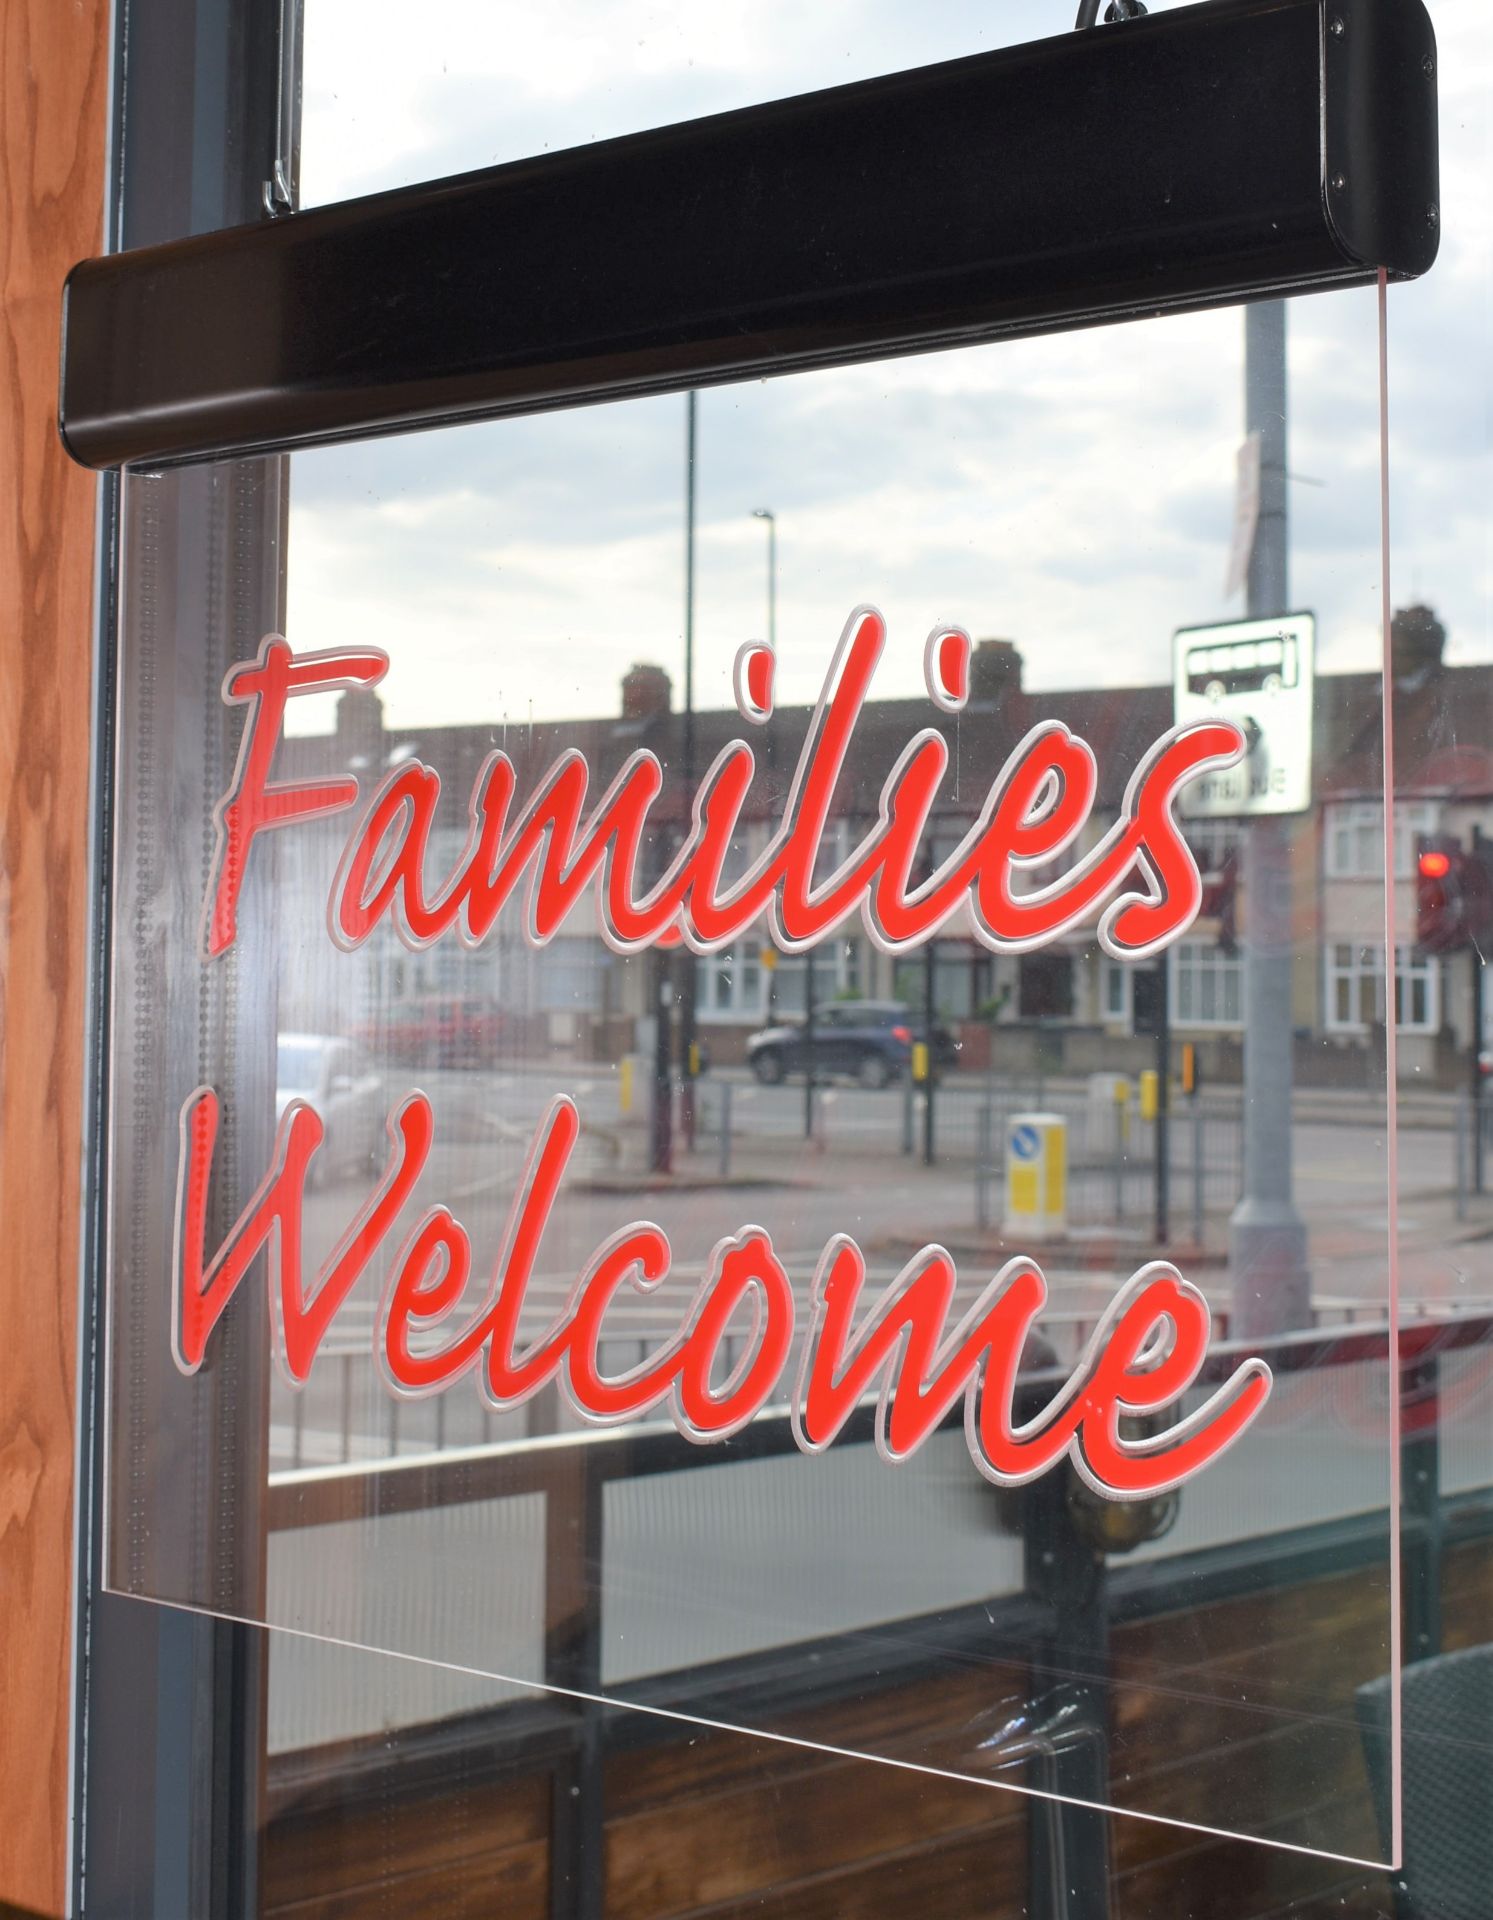 1 x Neon Effect Illuminated FAMILIES WELCOME Hanging Acrylic Sign - 65 x 60 cms - CL499 -